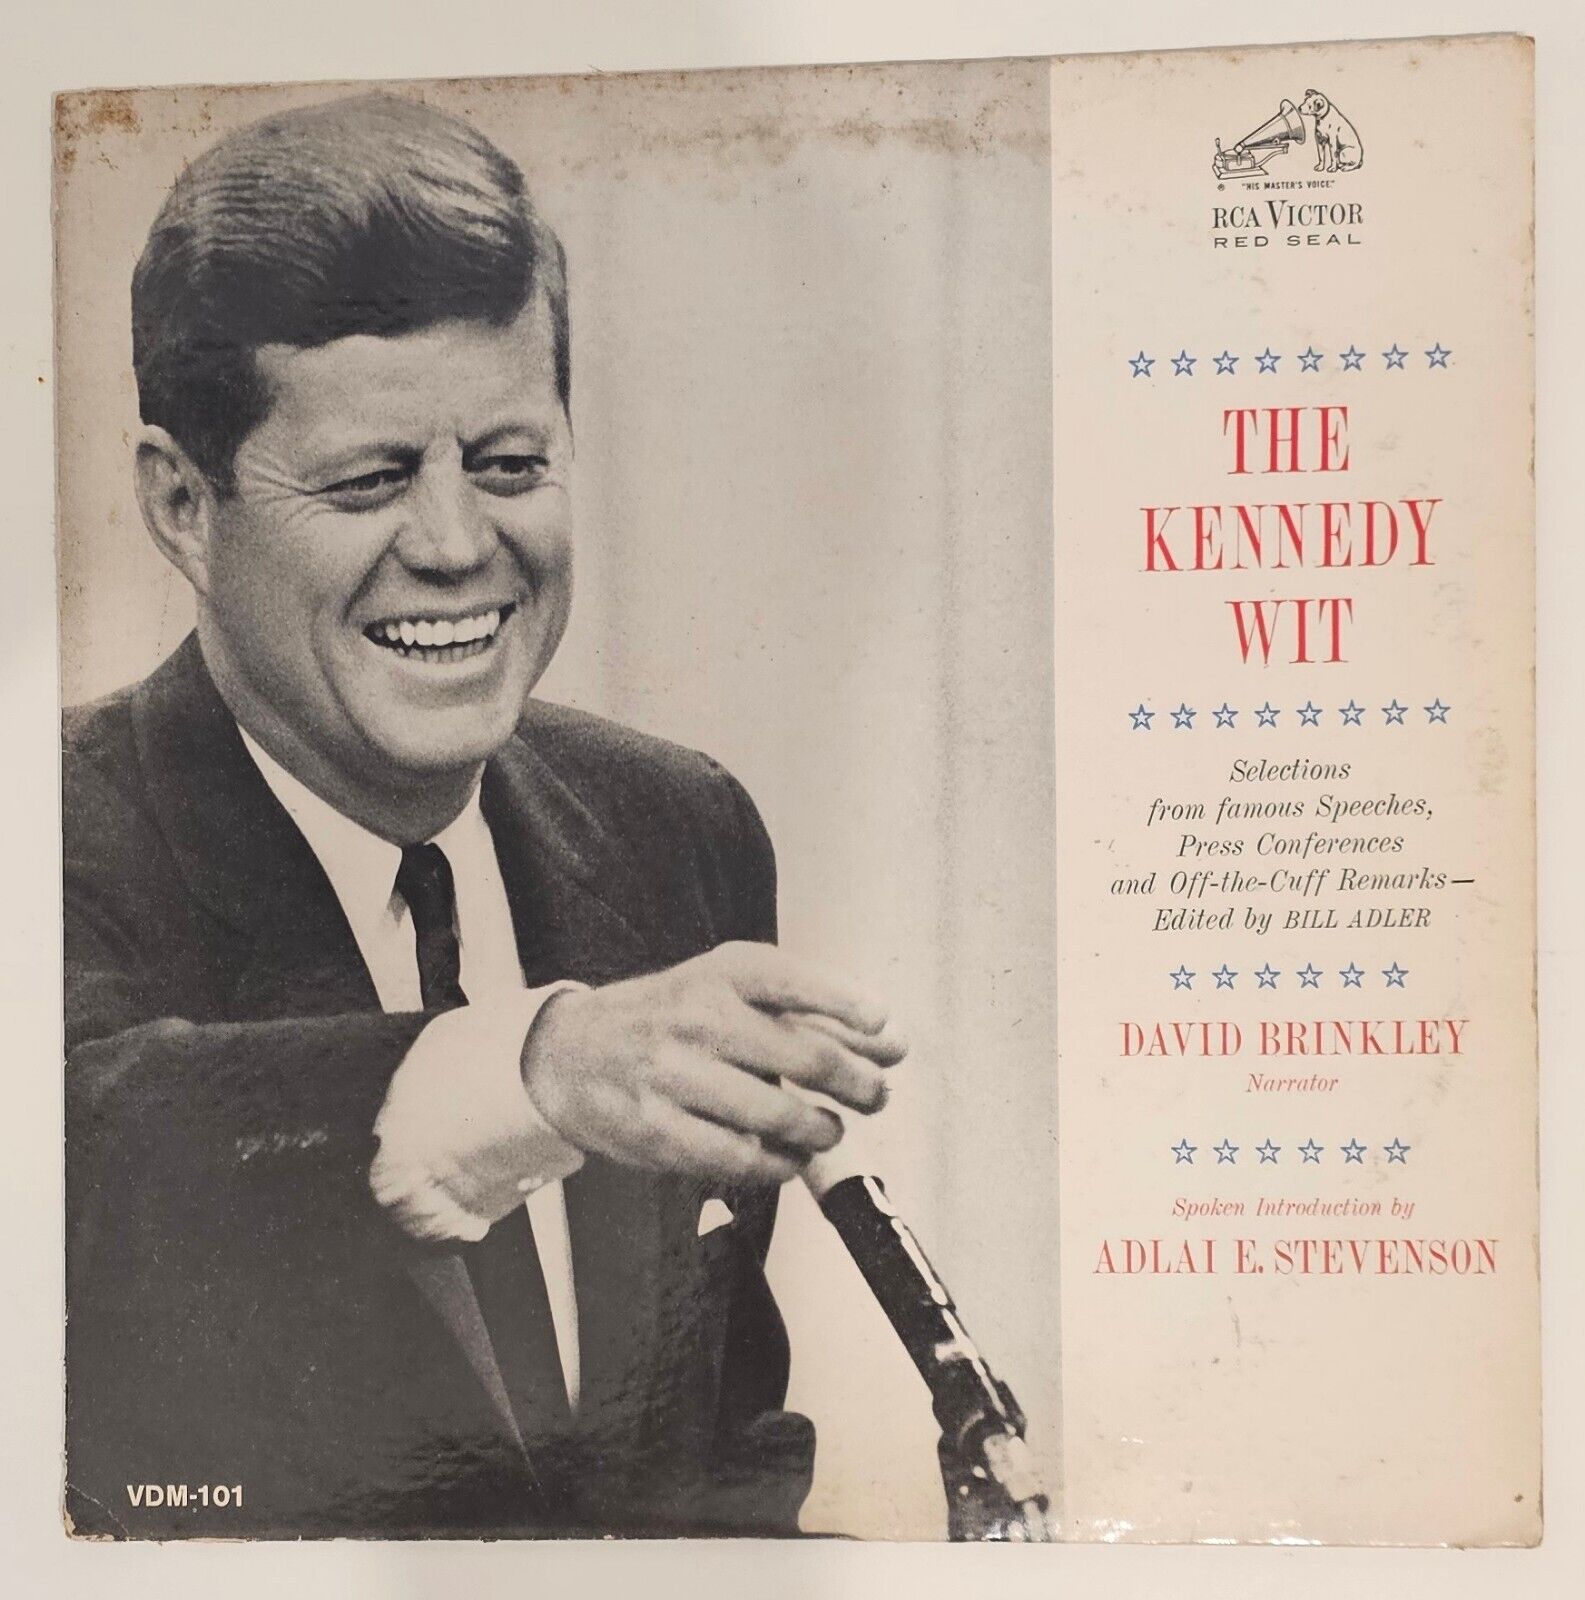 THE KENNEDY WIT LP- John F. Kennedy famous Speeches, Press Conferences, ect.